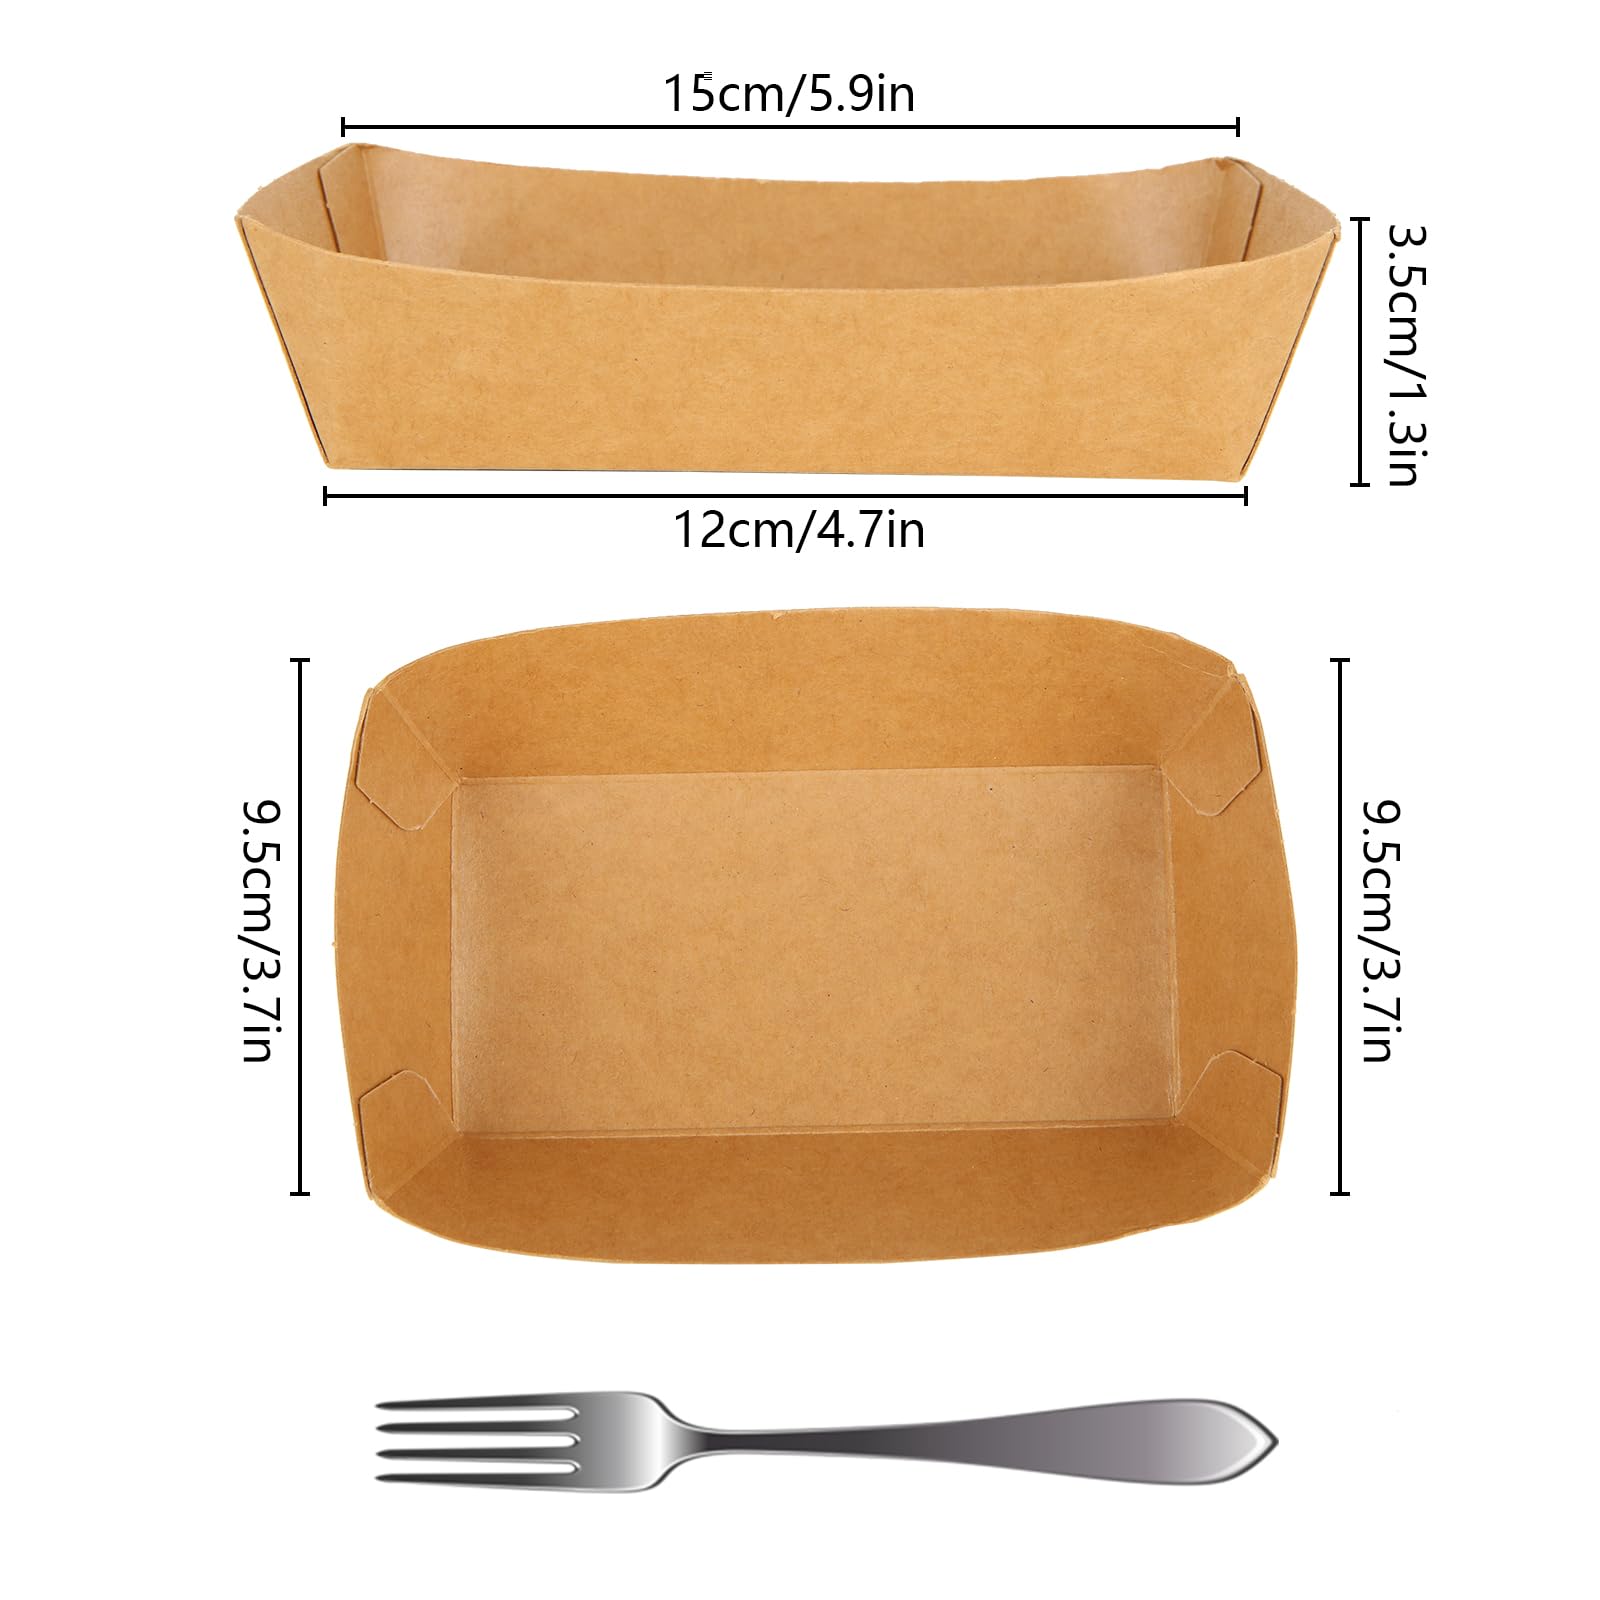 200 Pack Brown Kraft Paper Food Trays, 2 Lb Disposable Paper Food Boats, Kraft Paper Food Serving Tray, Greaseproof Paperboard Food Container for French Fries, Snacks, Nachos, Tacos, Picnic, Party